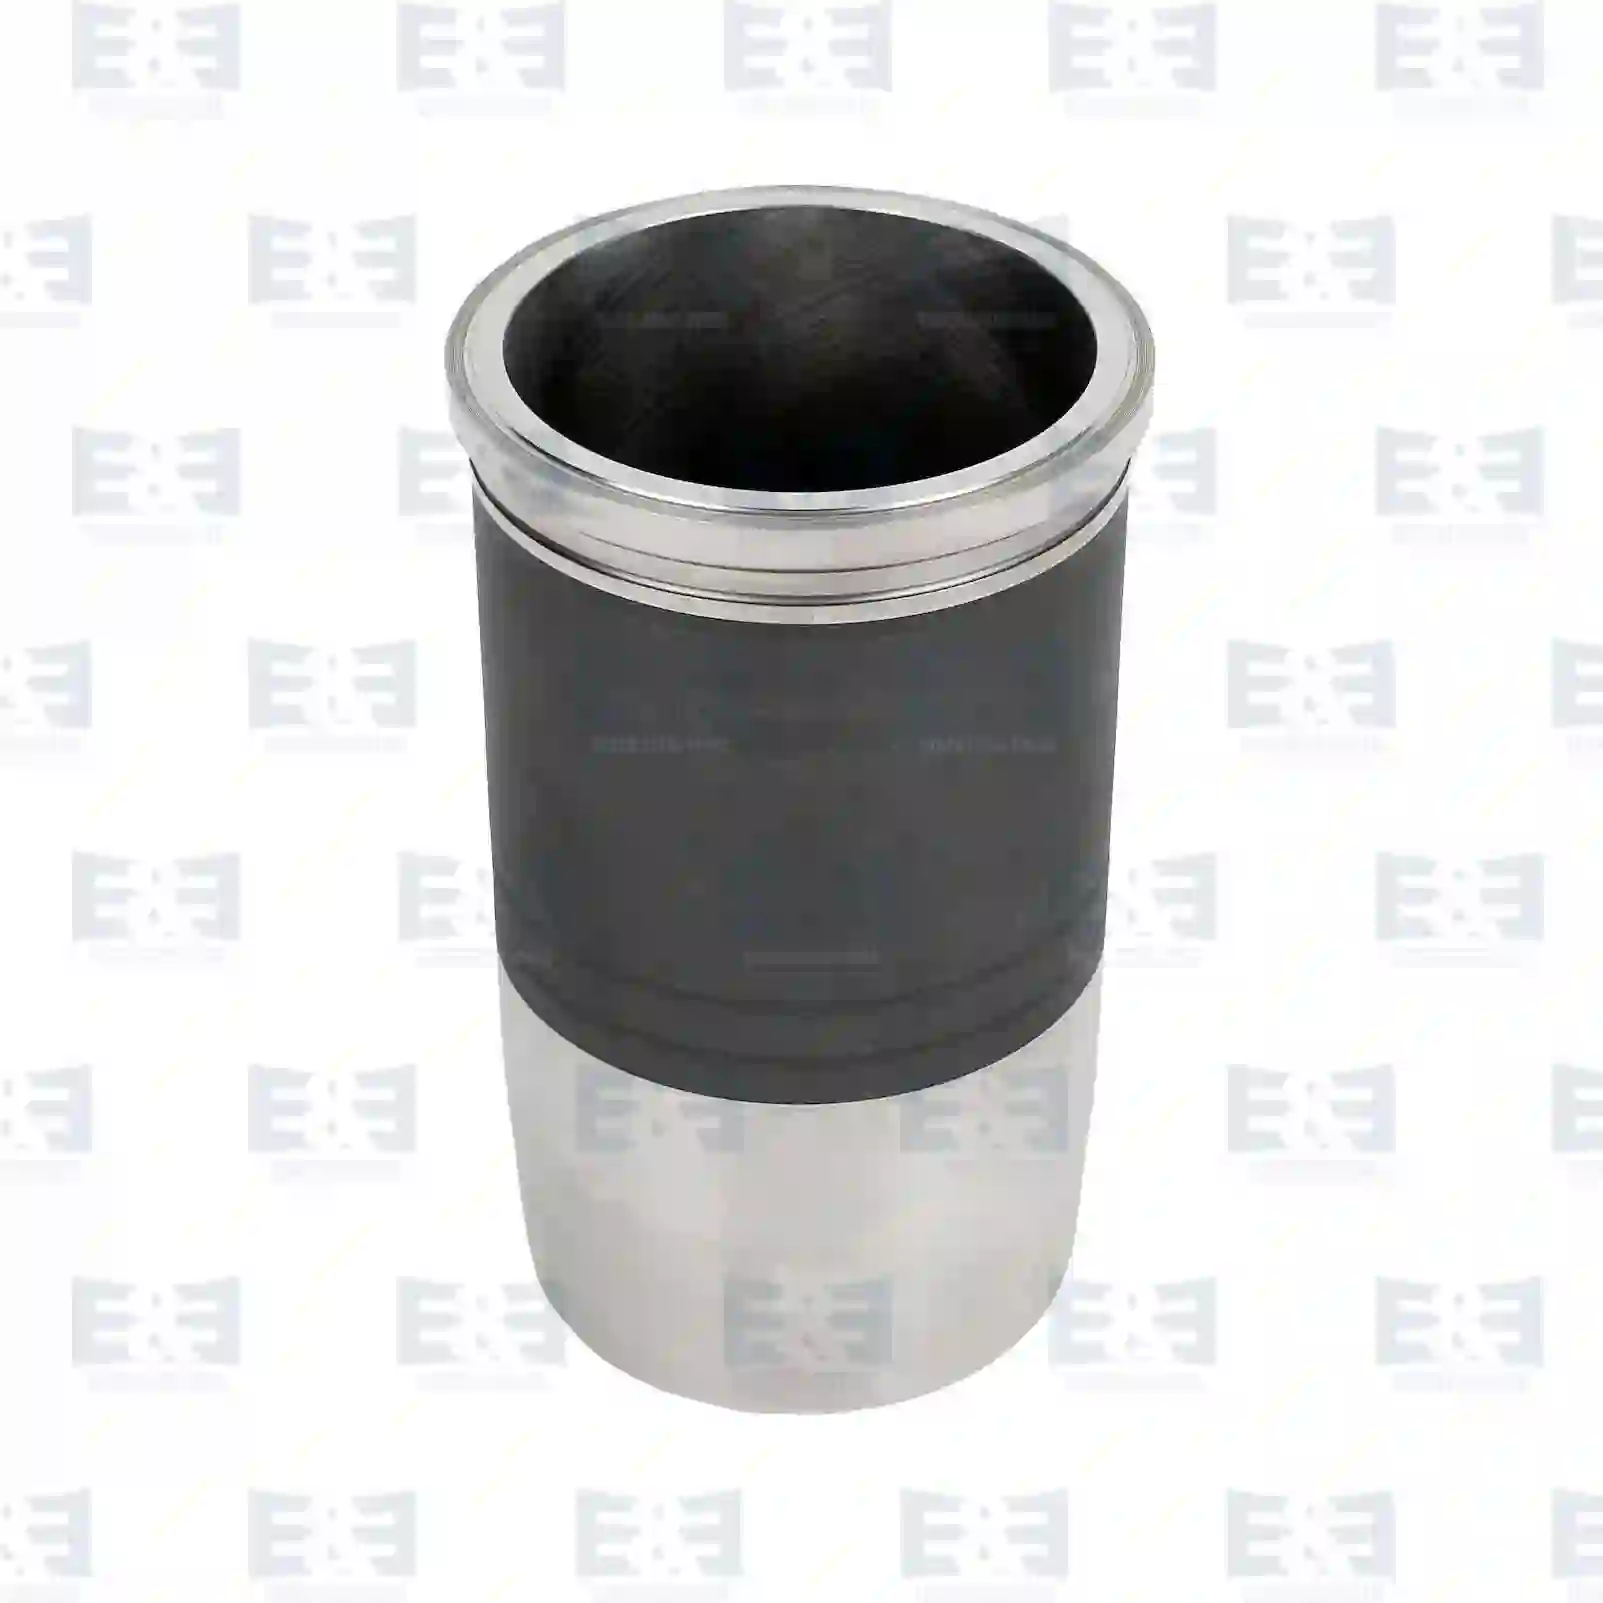 Cylinder liner, without seal rings, 2E2209120, 4220110010, 4220110210, 4220110310, 4230110010, 4230110110, 4230110210 ||  2E2209120 E&E Truck Spare Parts | Truck Spare Parts, Auotomotive Spare Parts Cylinder liner, without seal rings, 2E2209120, 4220110010, 4220110210, 4220110310, 4230110010, 4230110110, 4230110210 ||  2E2209120 E&E Truck Spare Parts | Truck Spare Parts, Auotomotive Spare Parts